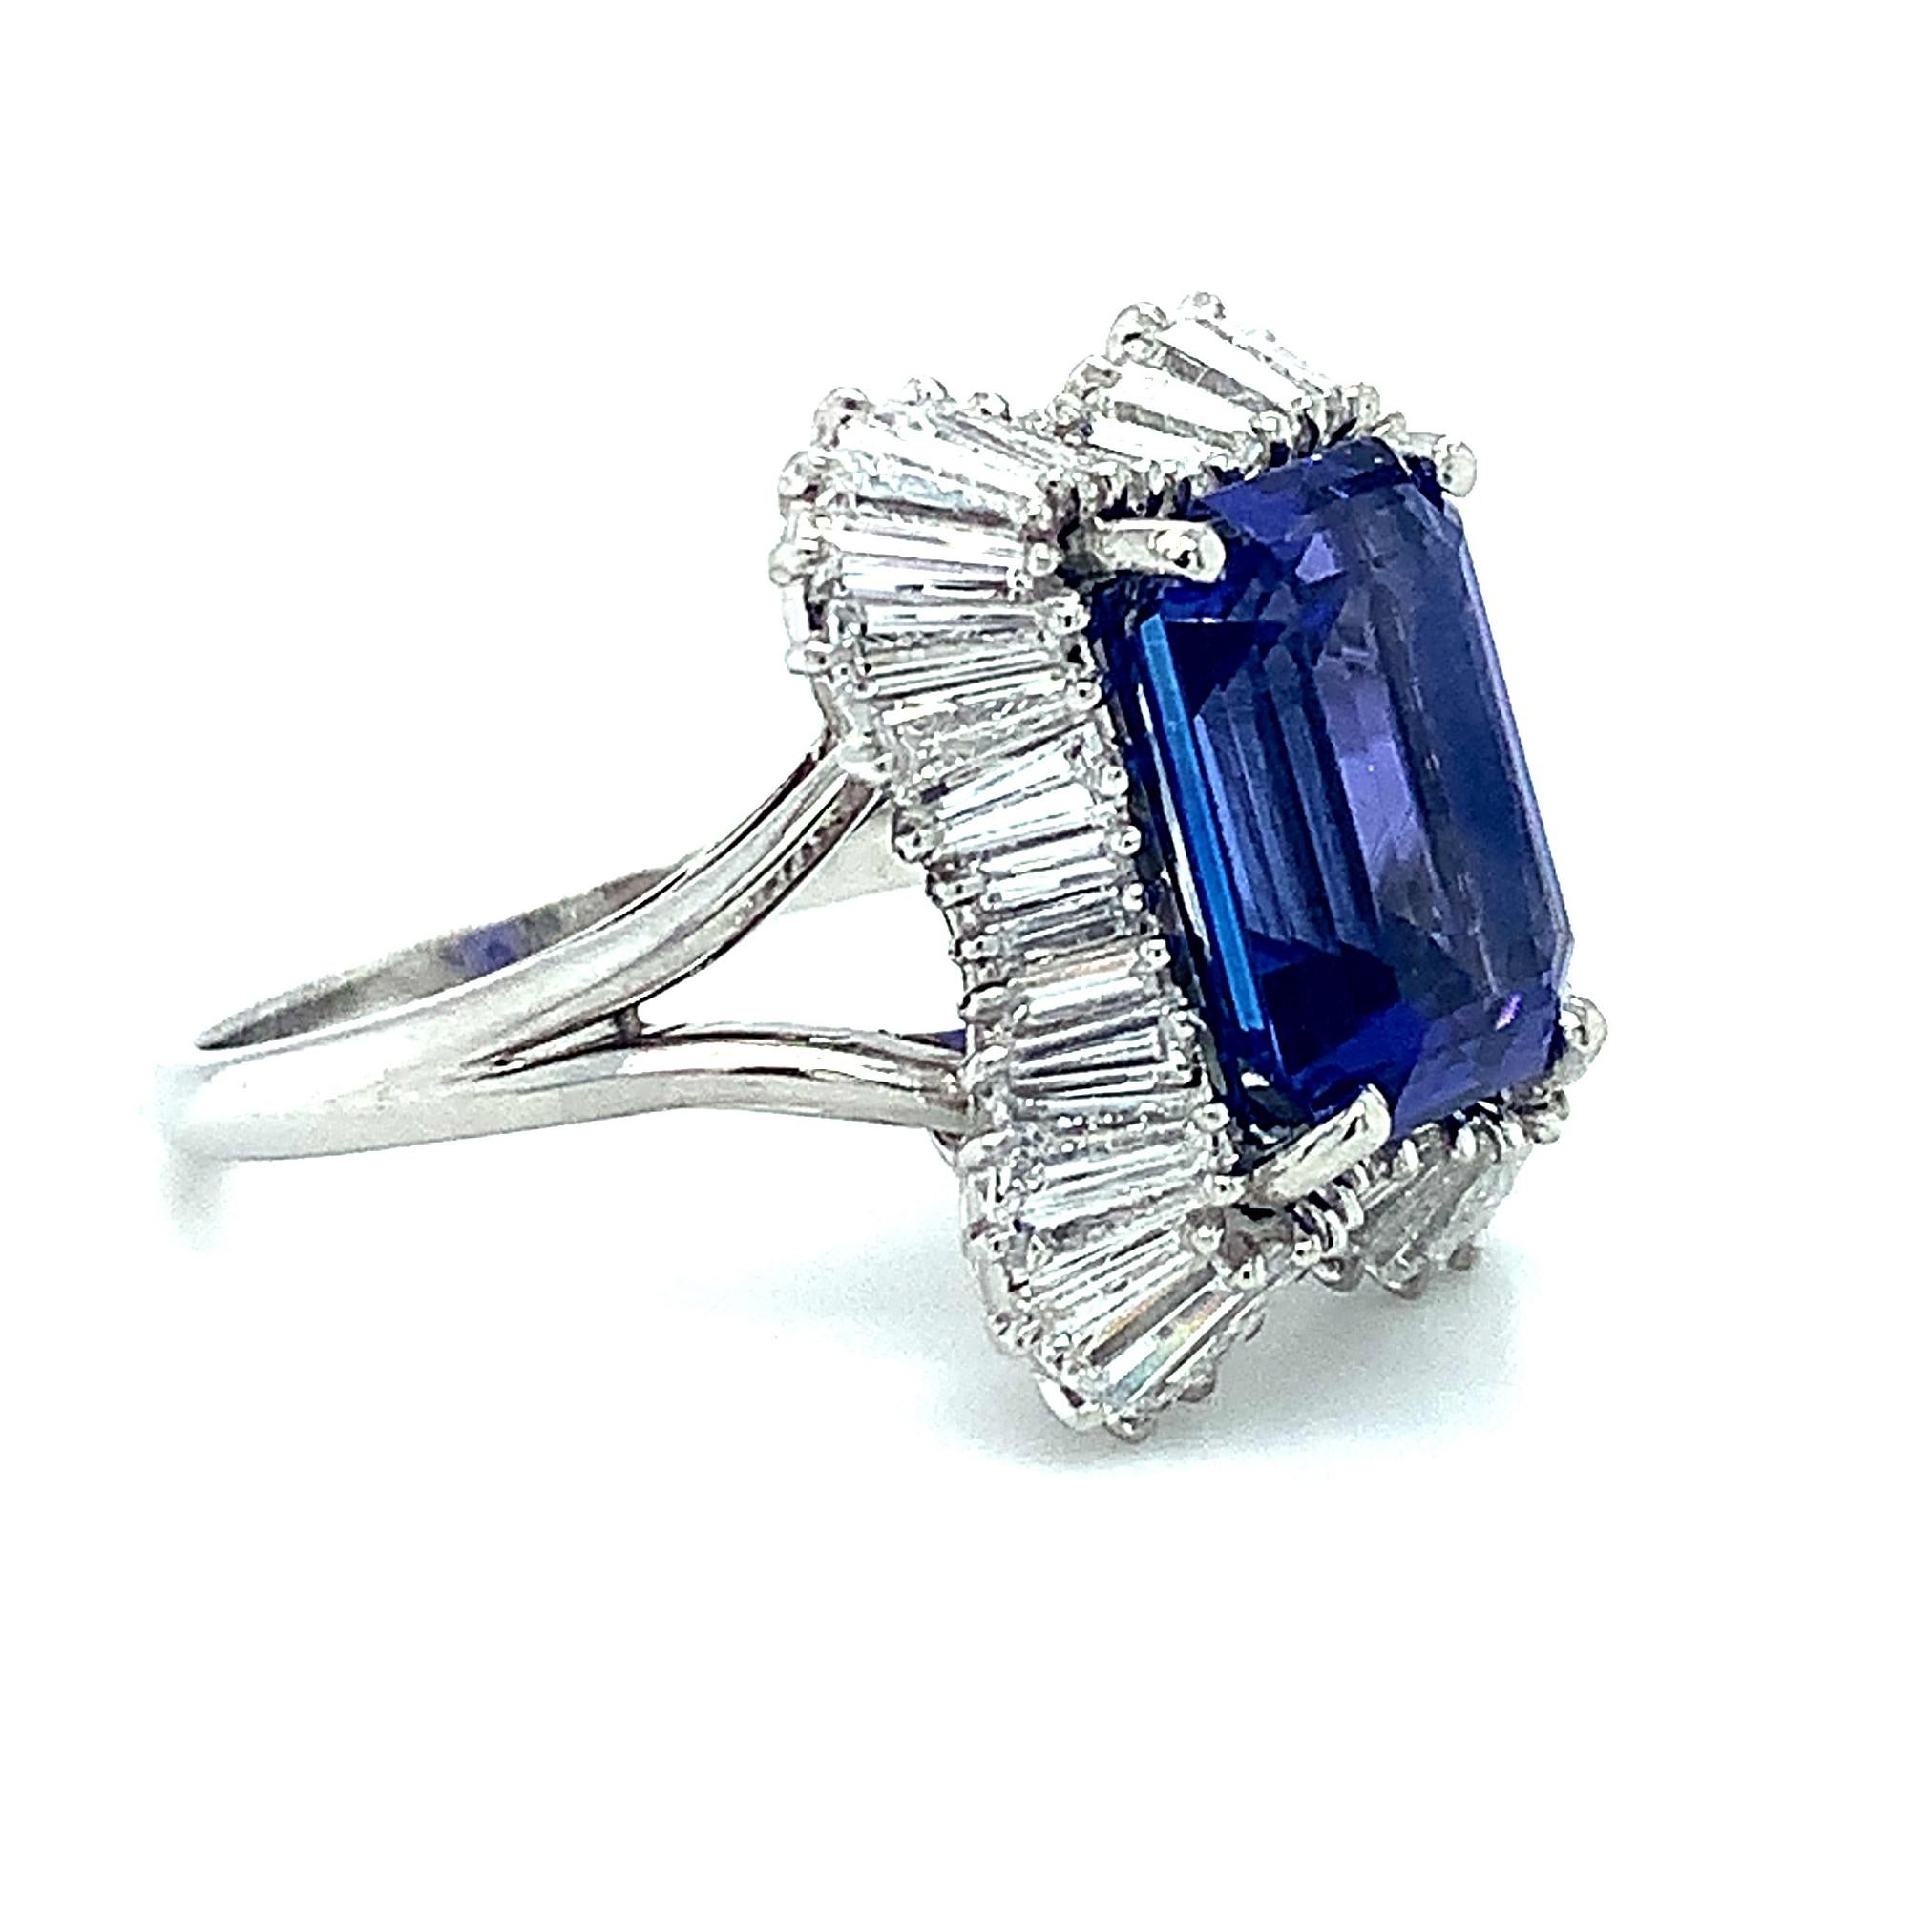 Emerald Cut Tanzanite and Diamond Baguette Cocktail Ring in Platinum, 4.89 Carats For Sale